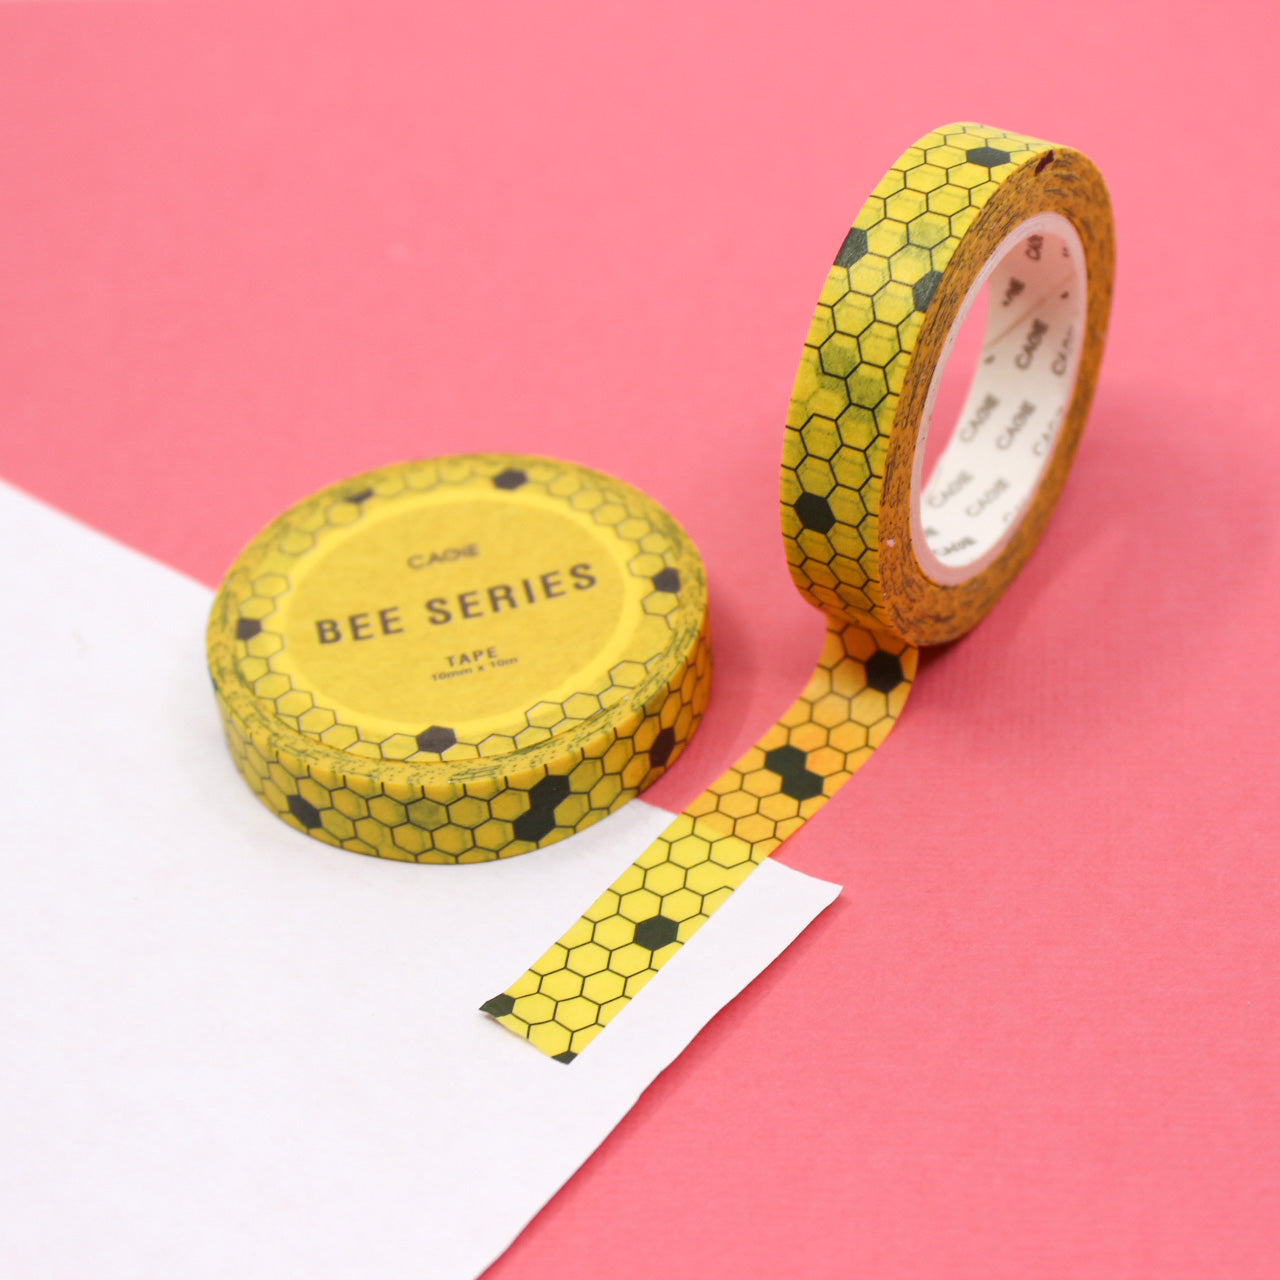 Embrace the buzz of creativity with our Yellow Honeycomb Bumble Bee Washi Tape, featuring delightful honeycomb and bumble bee designs. Ideal for adding a touch of nature's beauty to your crafts. This tape is sold at BBB Supplies Craft Shop.